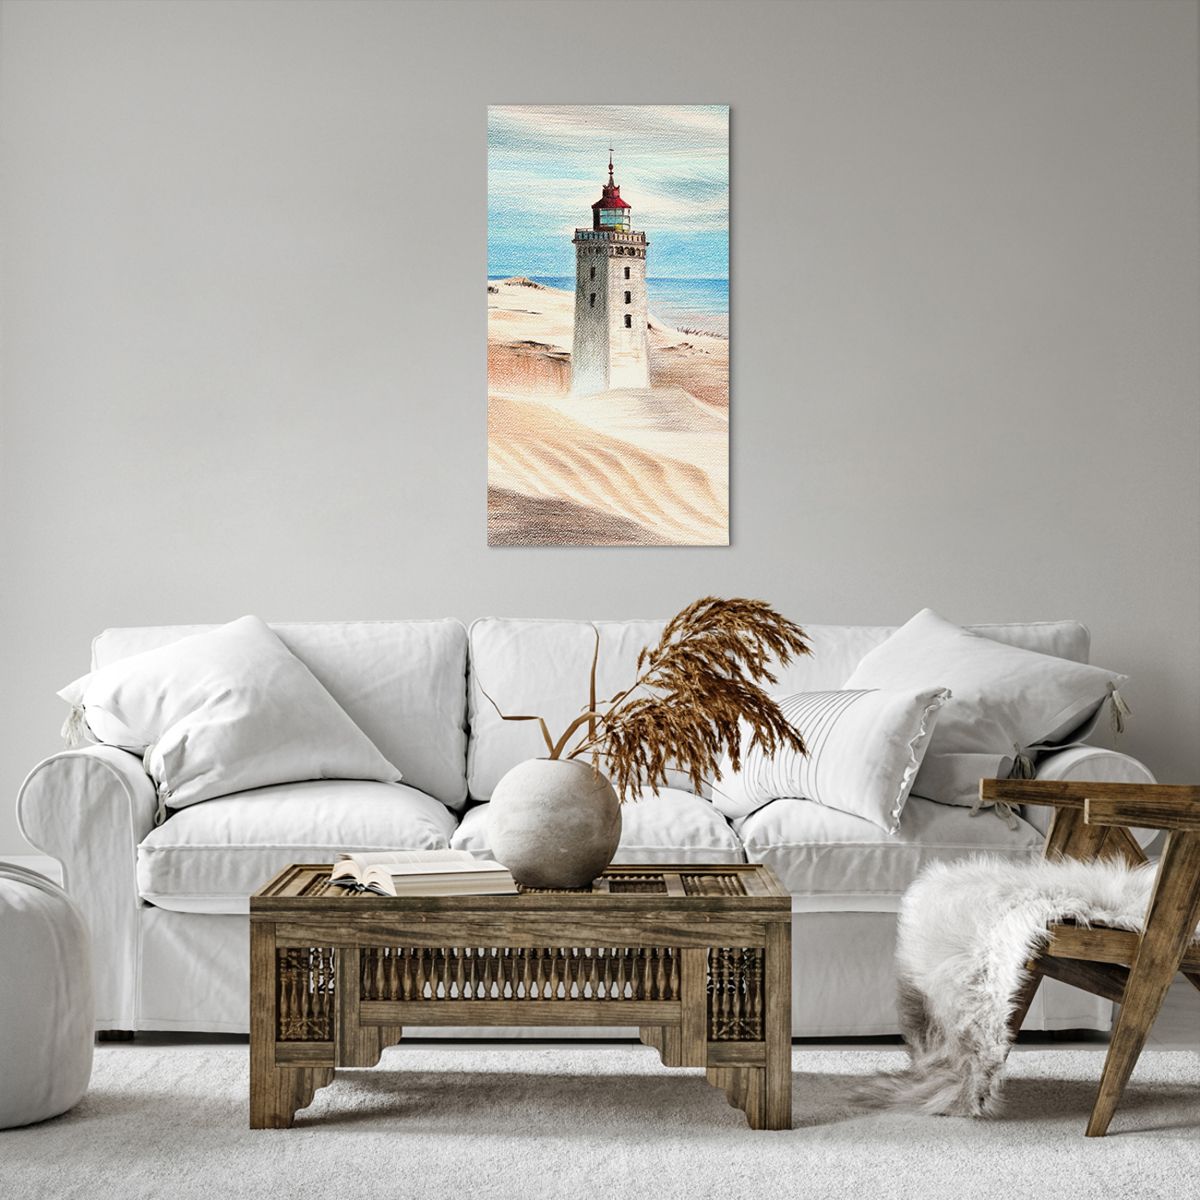 Canvas picture Lighthouse, Canvas picture Beach, Canvas picture Sea, Canvas picture Dune, Canvas picture Painting